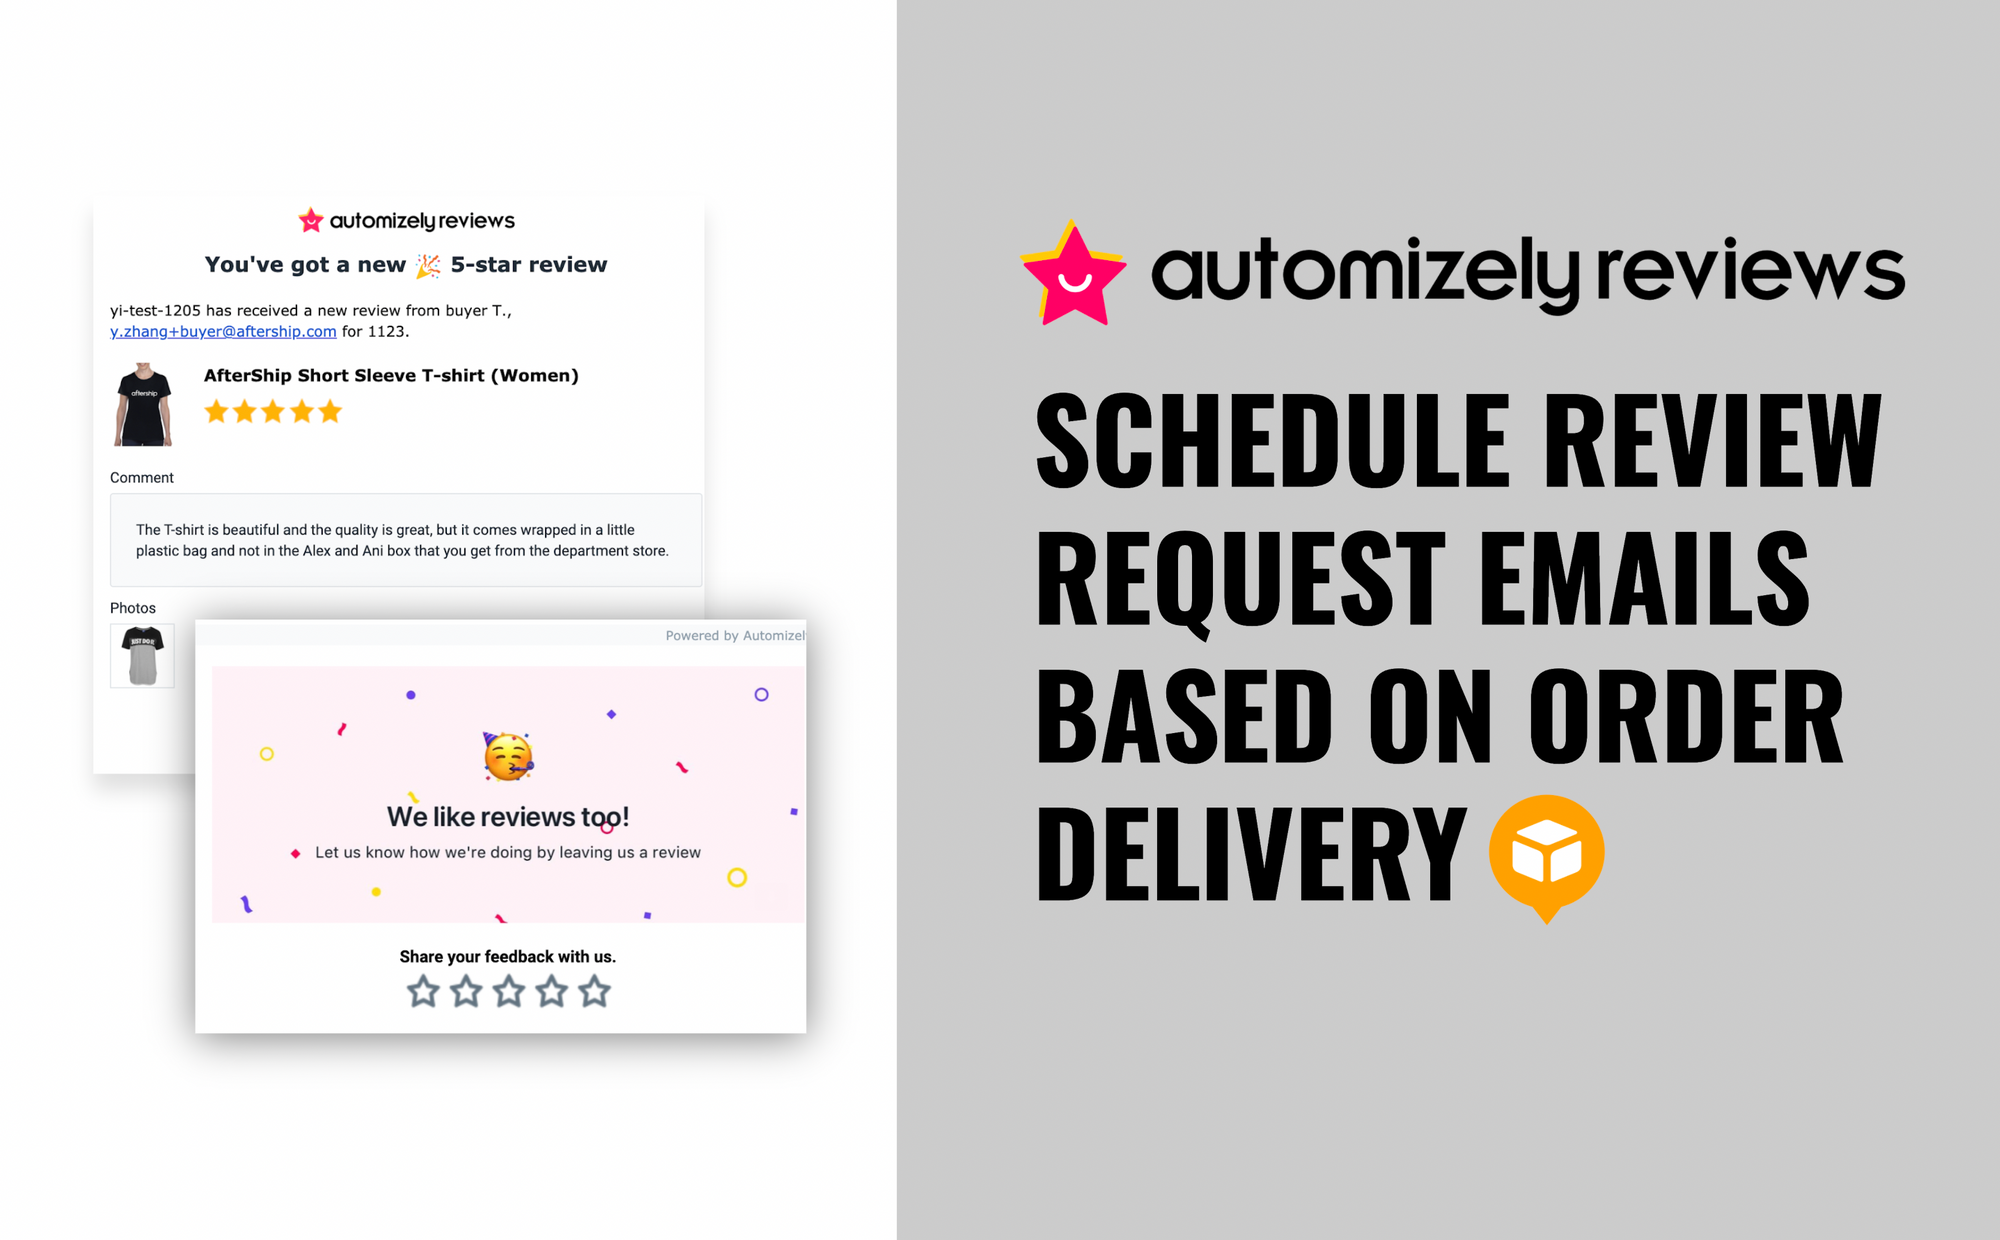 Push Review request emails automatically after delivering orders successfully